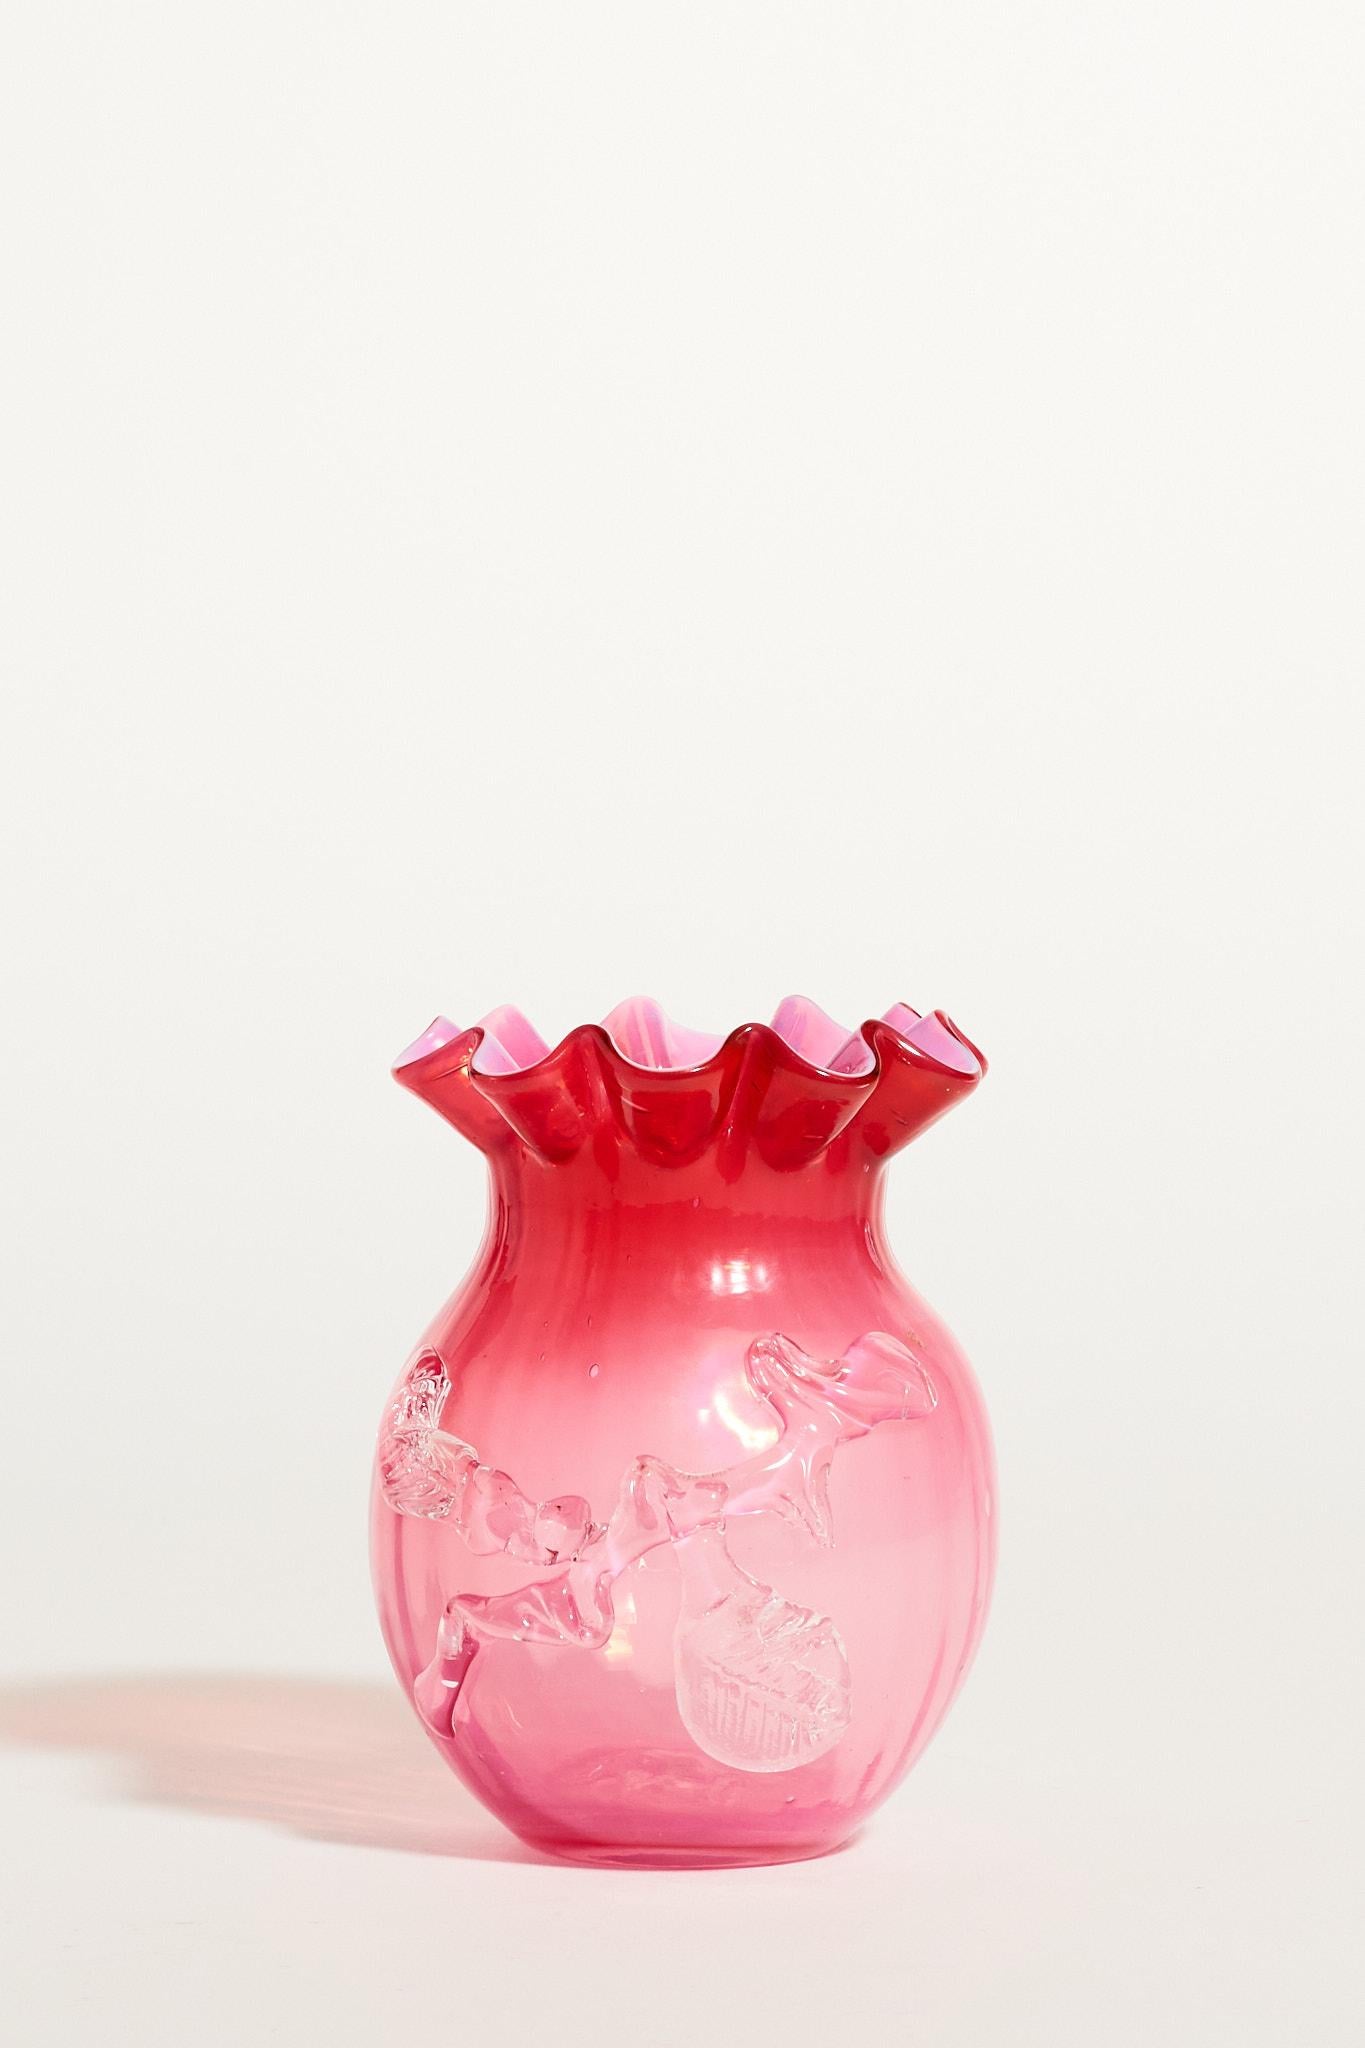 Ruffle rim bud vase with ombré cranberry pink to light pink glass.